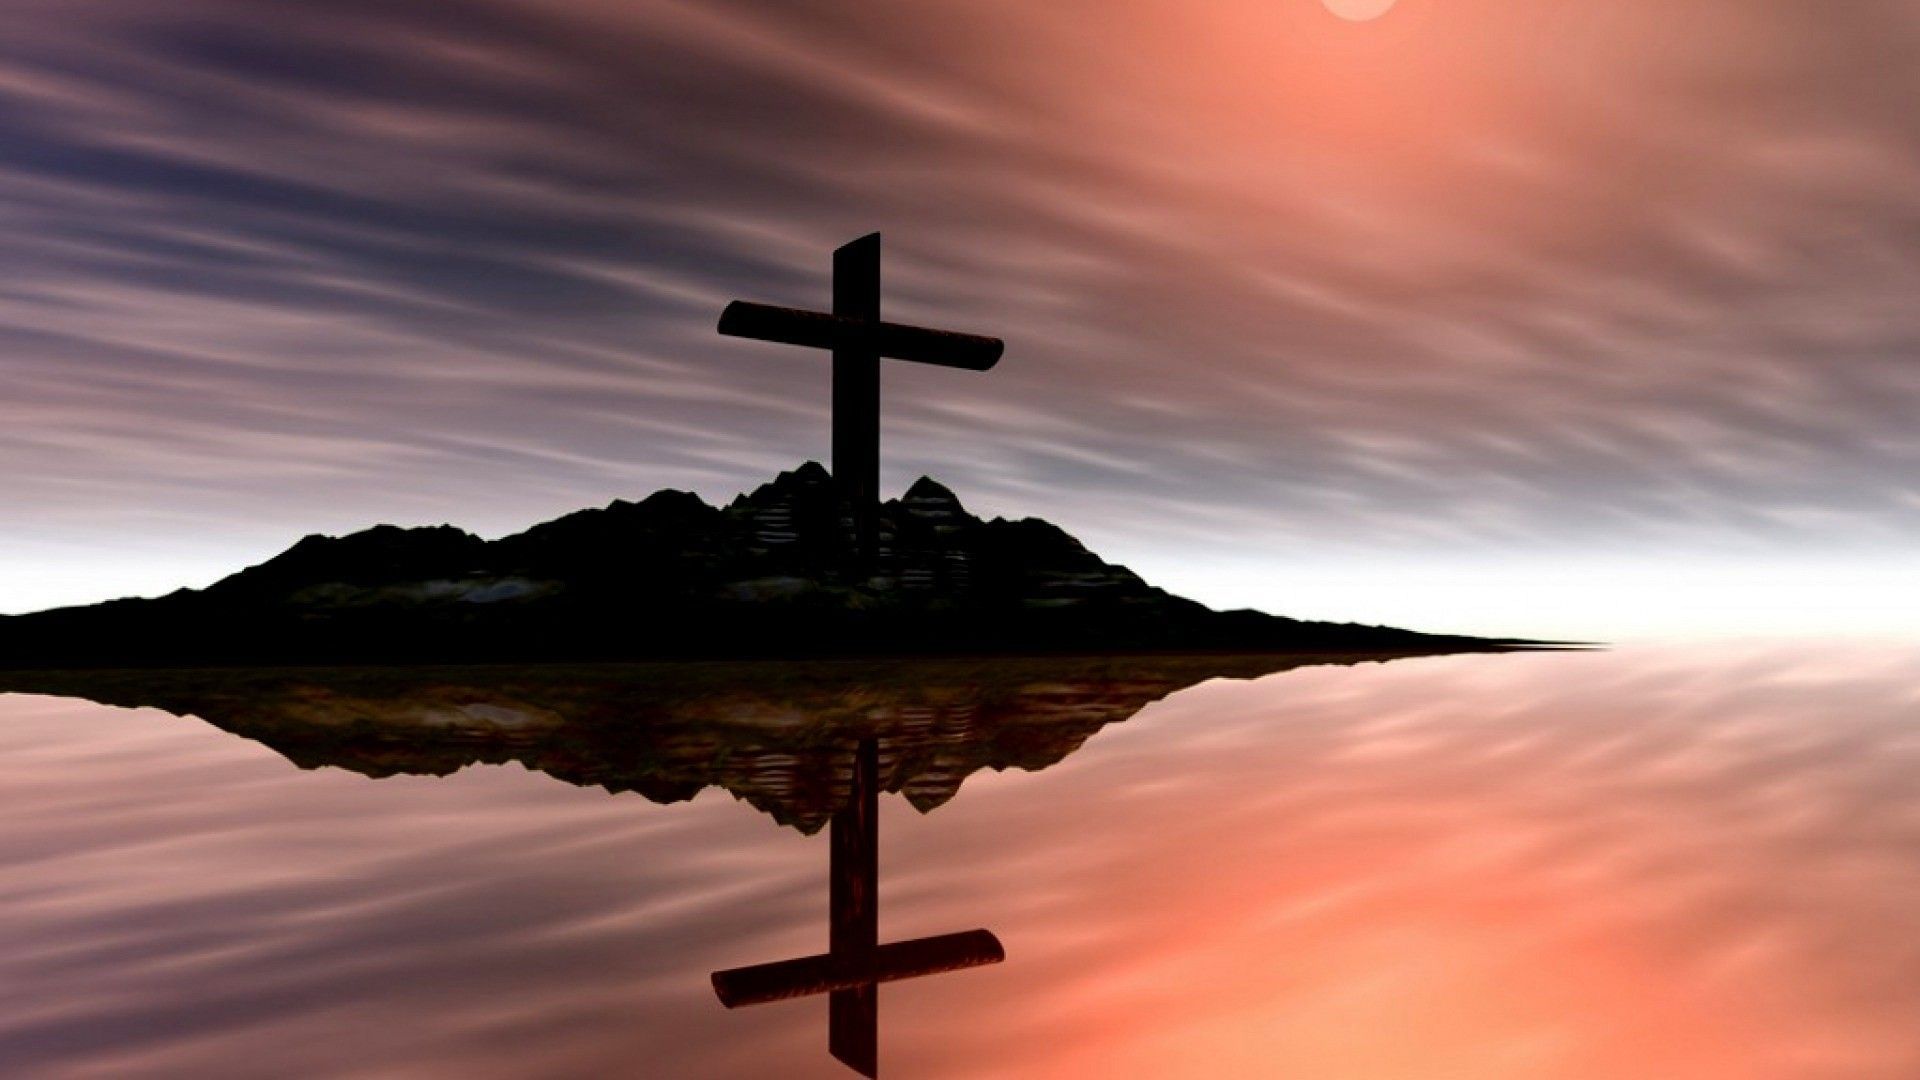 The cross of Jesus on a hill reflected in water - Cross